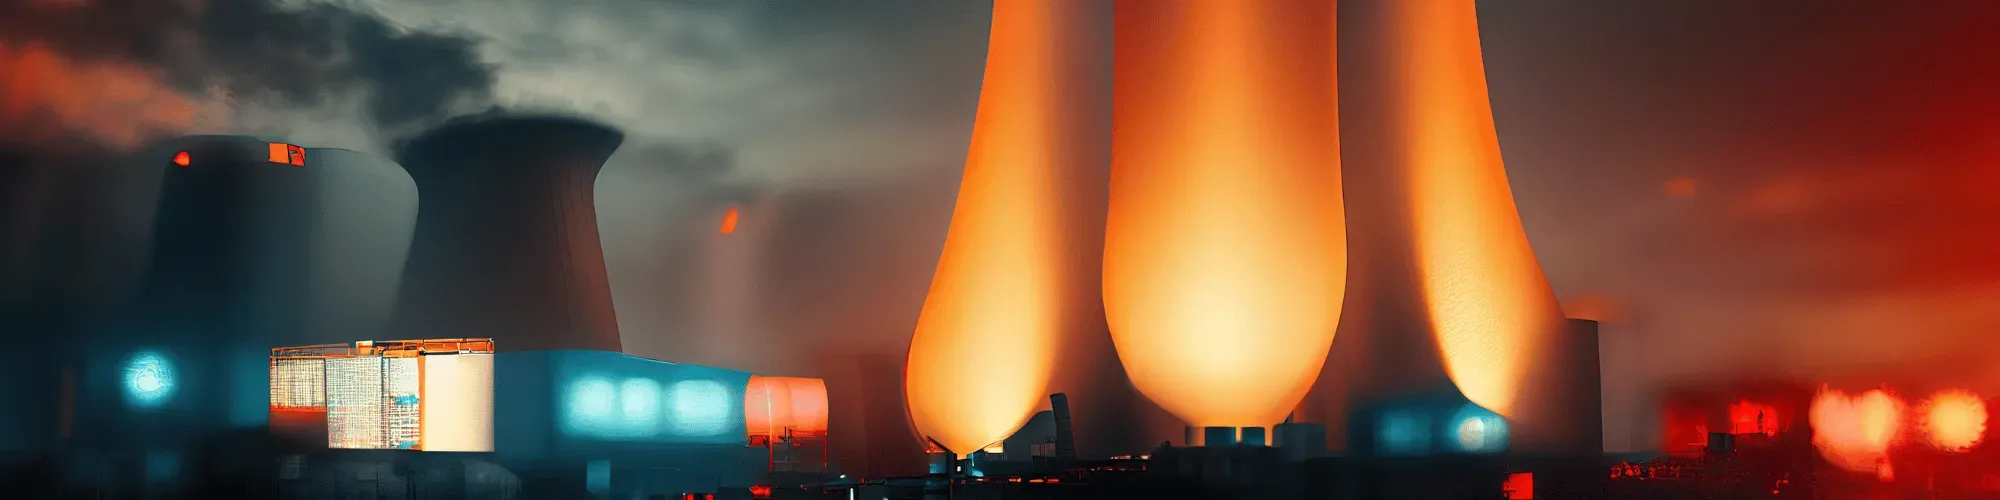 Nuclear power plant producing energy in the UK